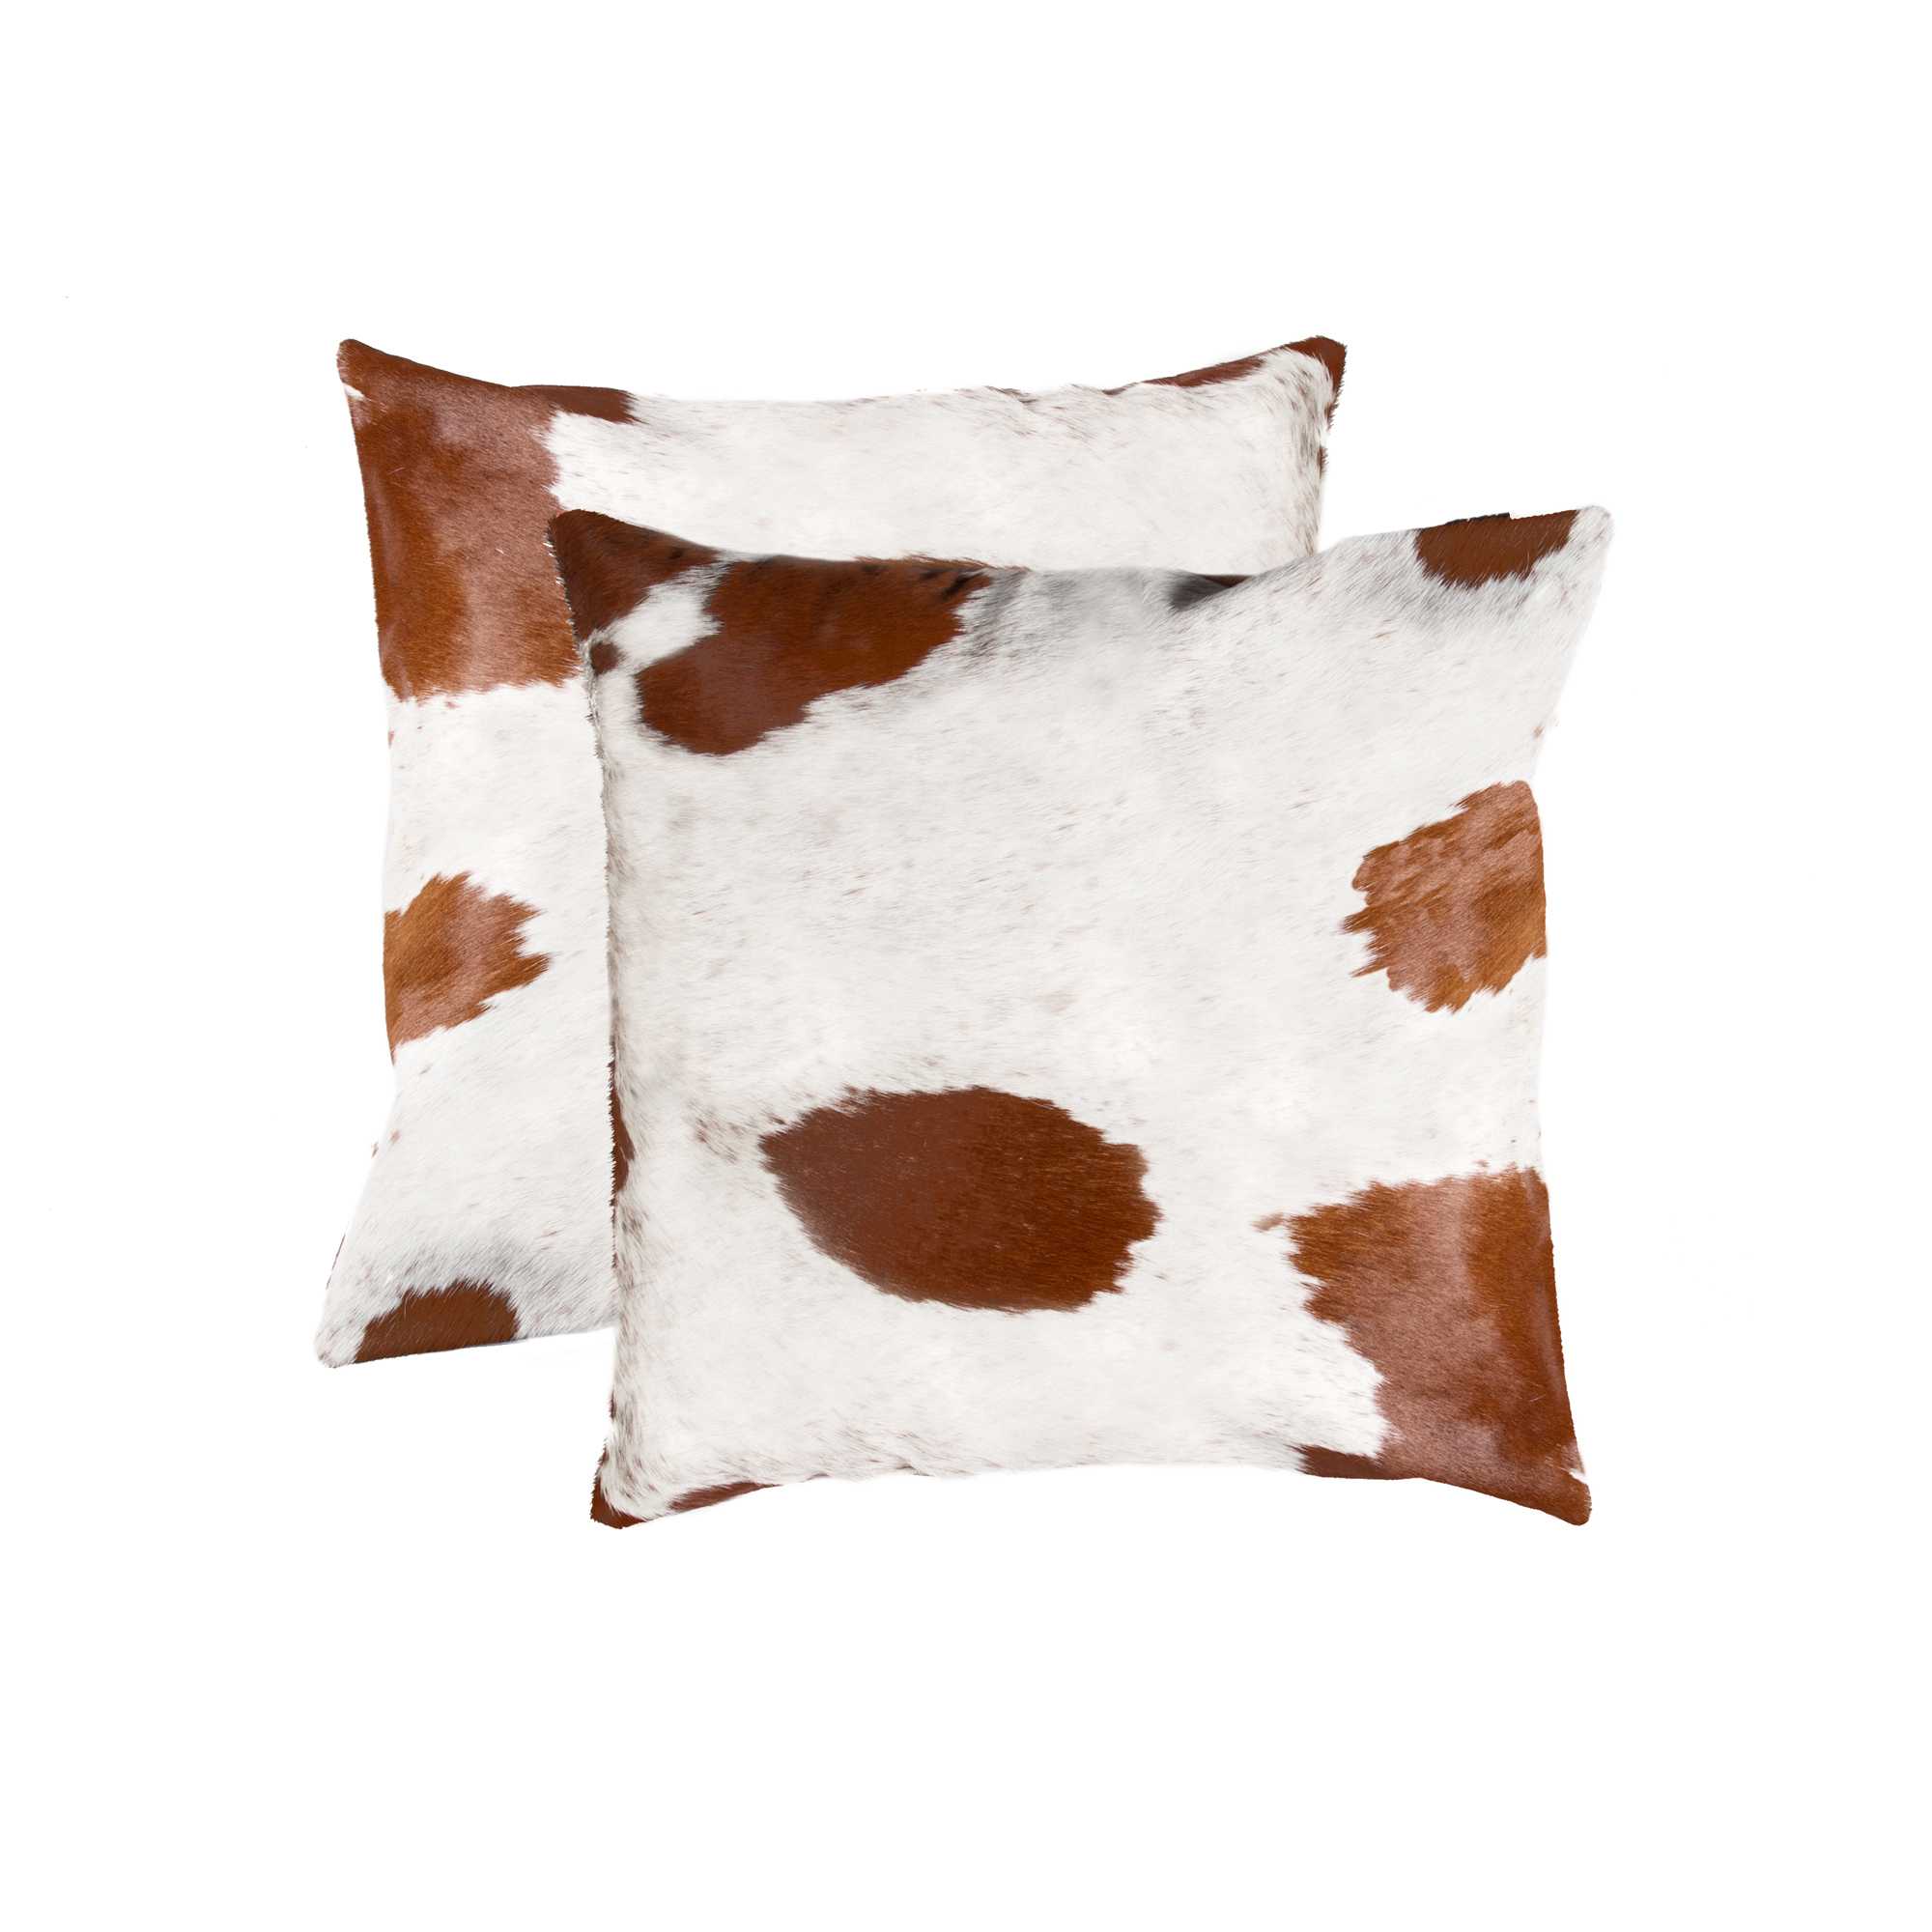 18" x 18" x 5" White And Brown Cowhide - Pillow 2-Pack